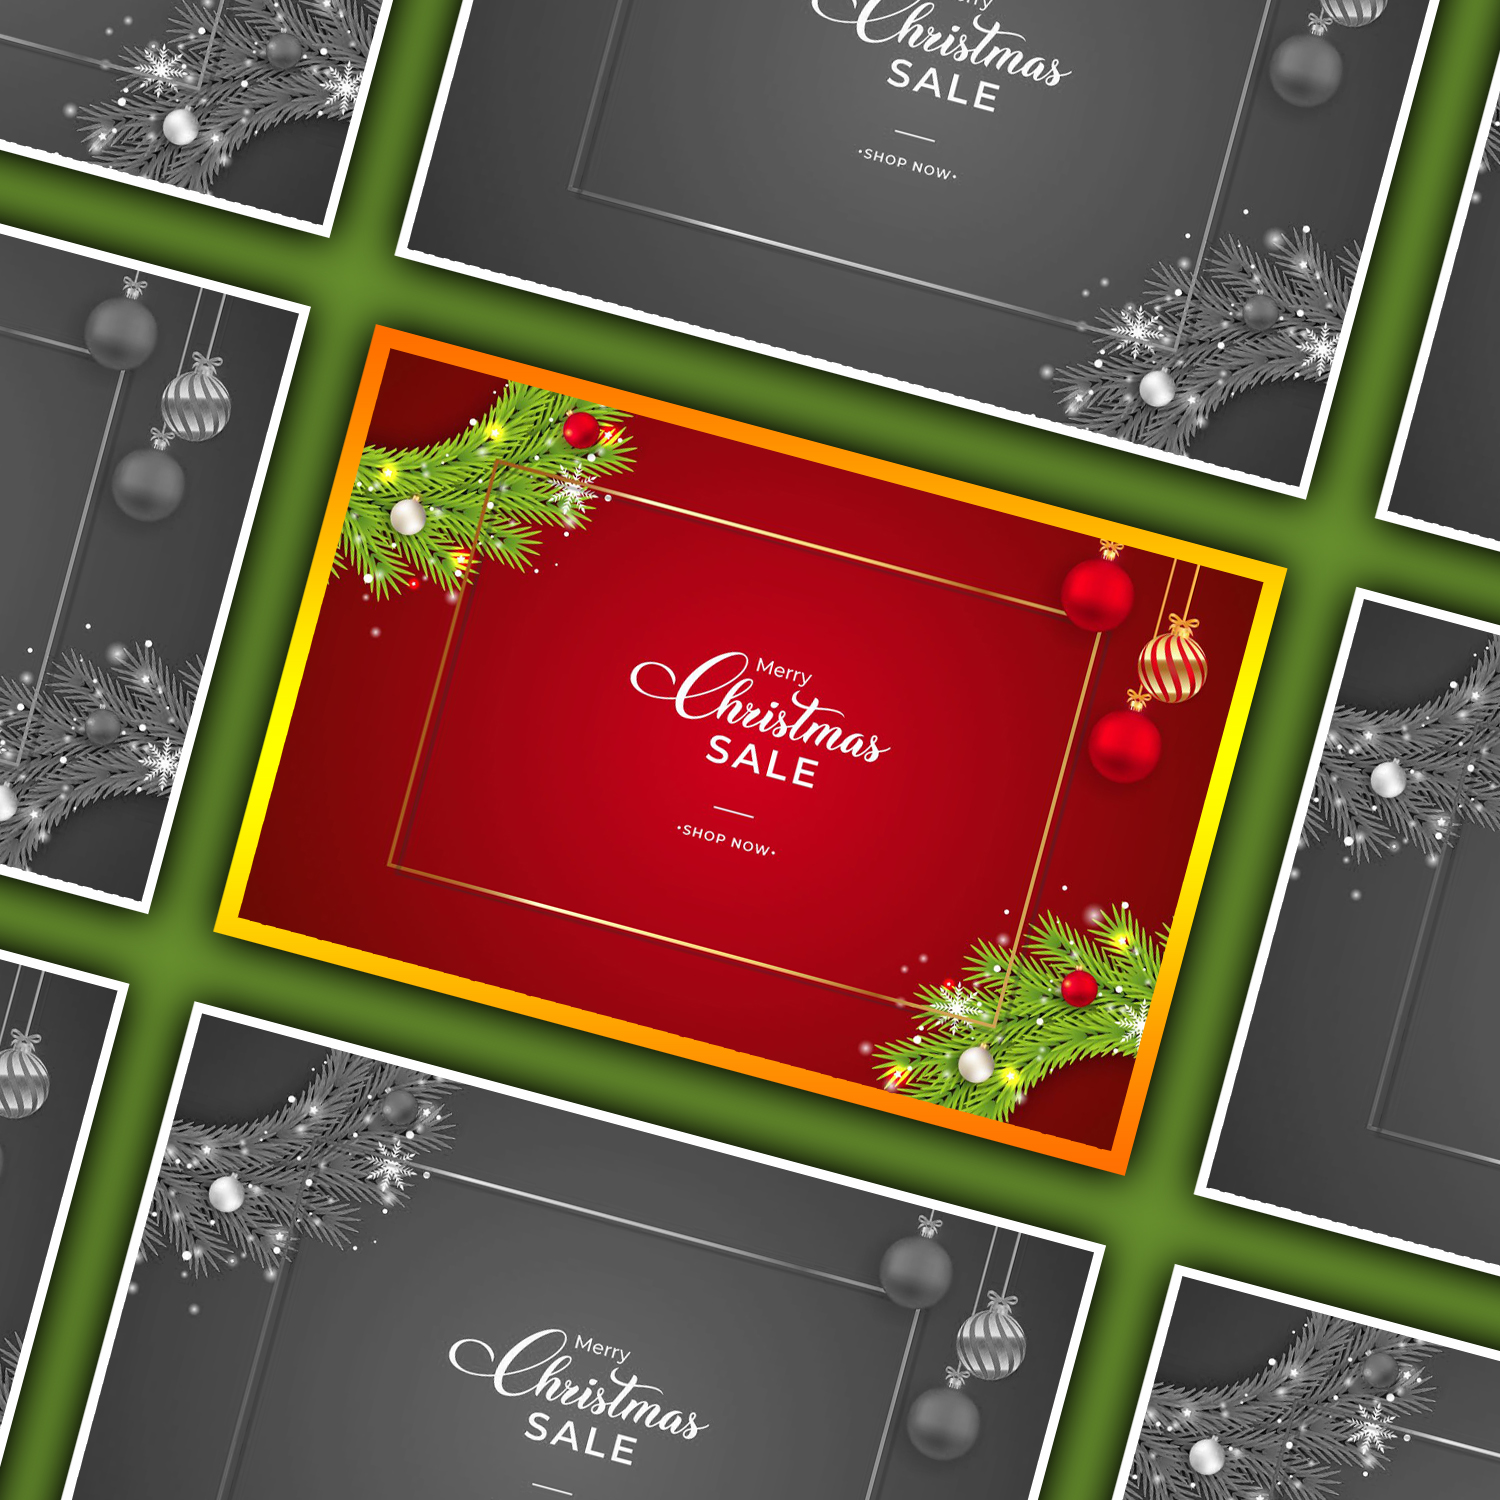 Images with christmas sales banner with red balls.